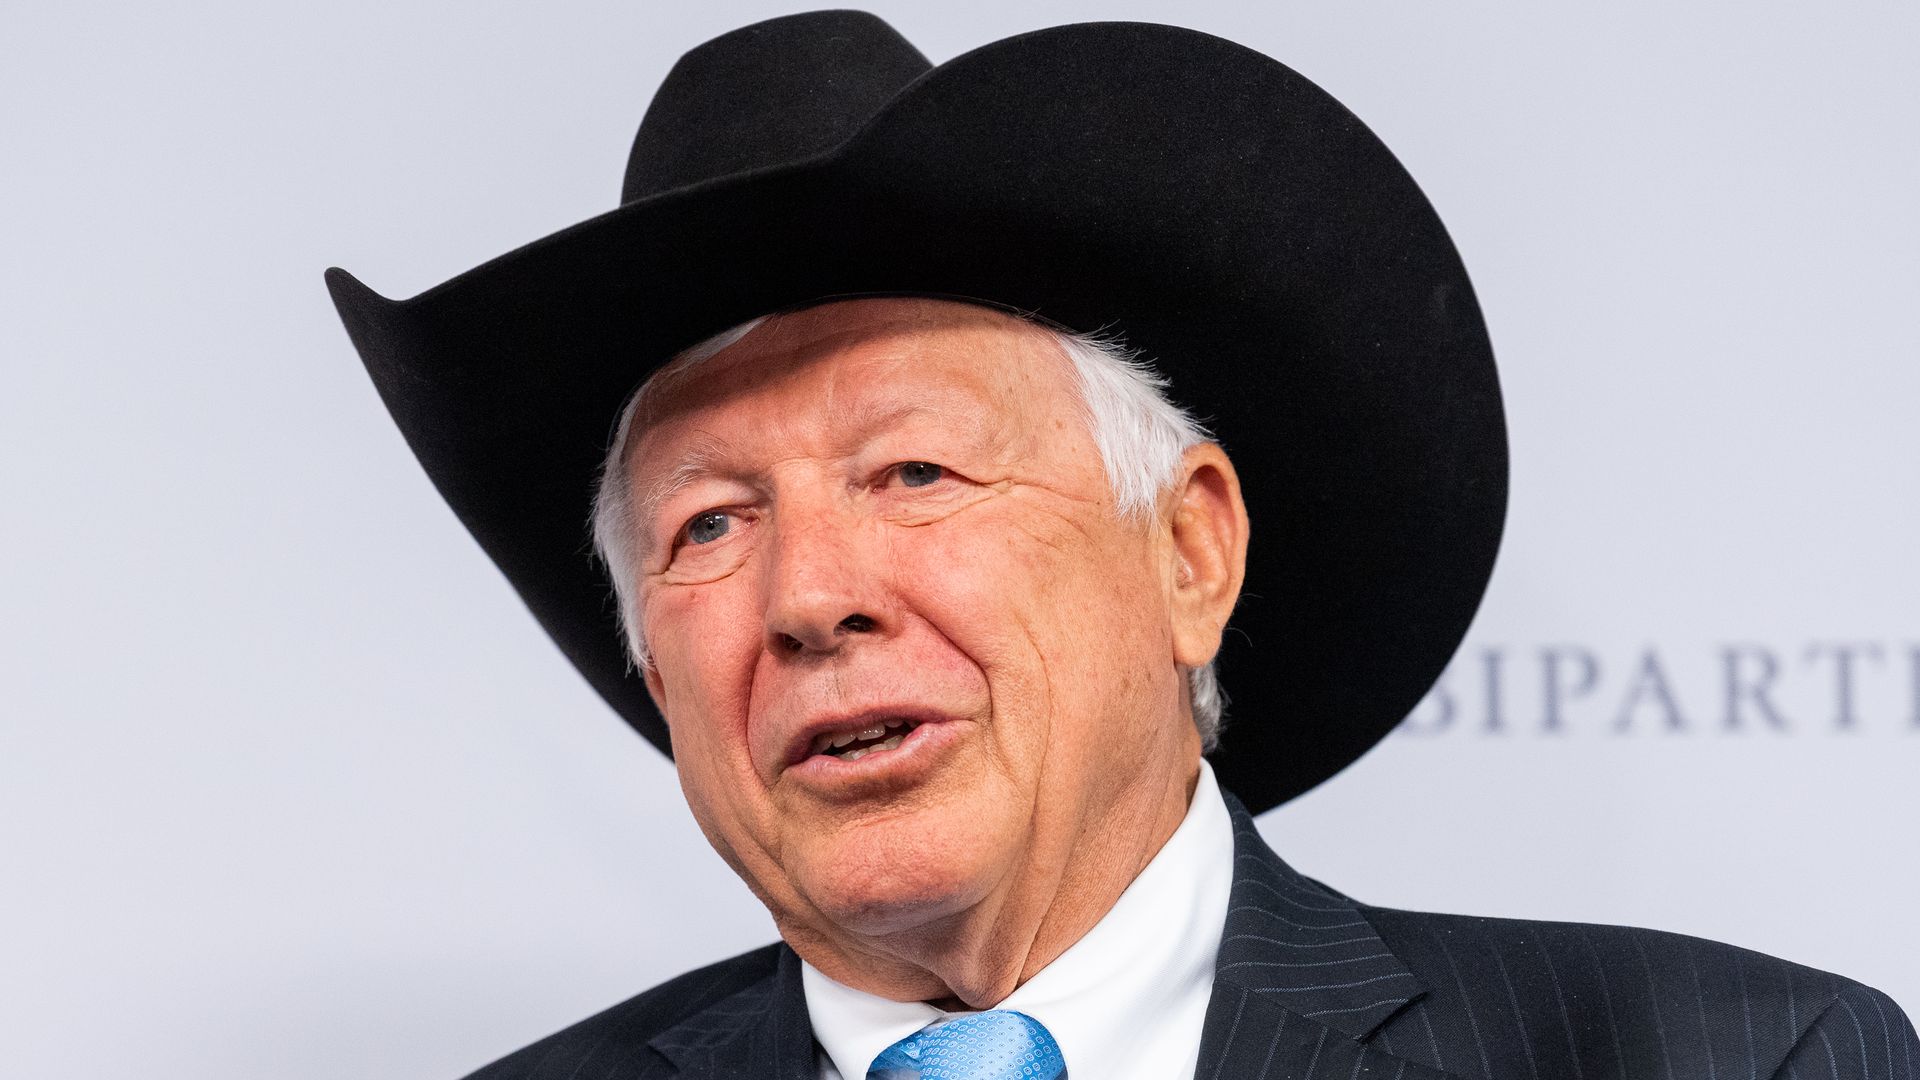 Foster Friess donning a black cowboy hat